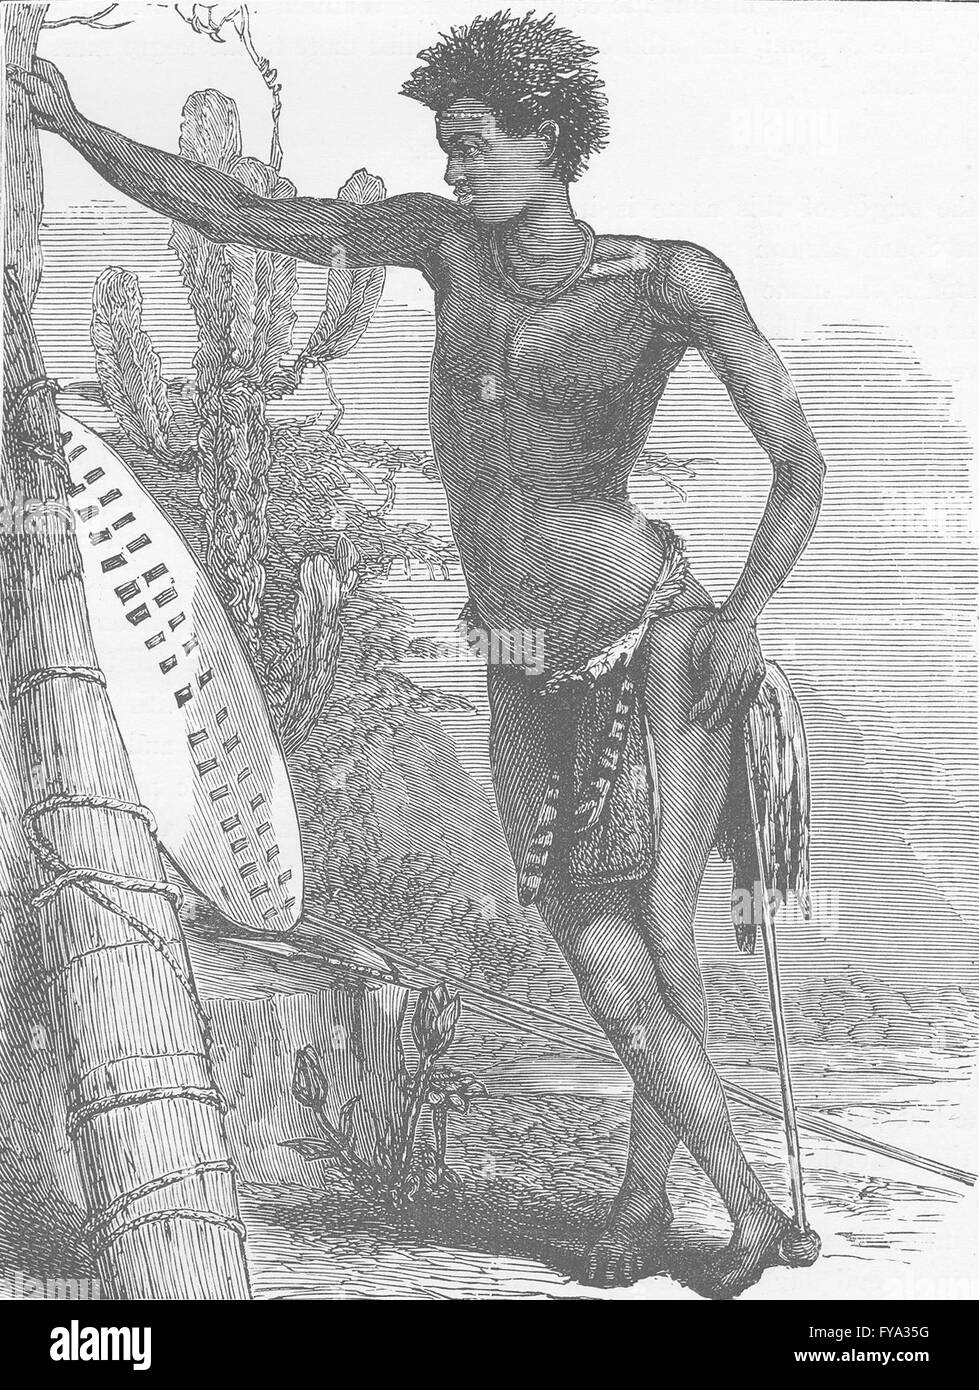 SOUTH AFRICA: Zulu lad, antique print 1890 Stock Photo